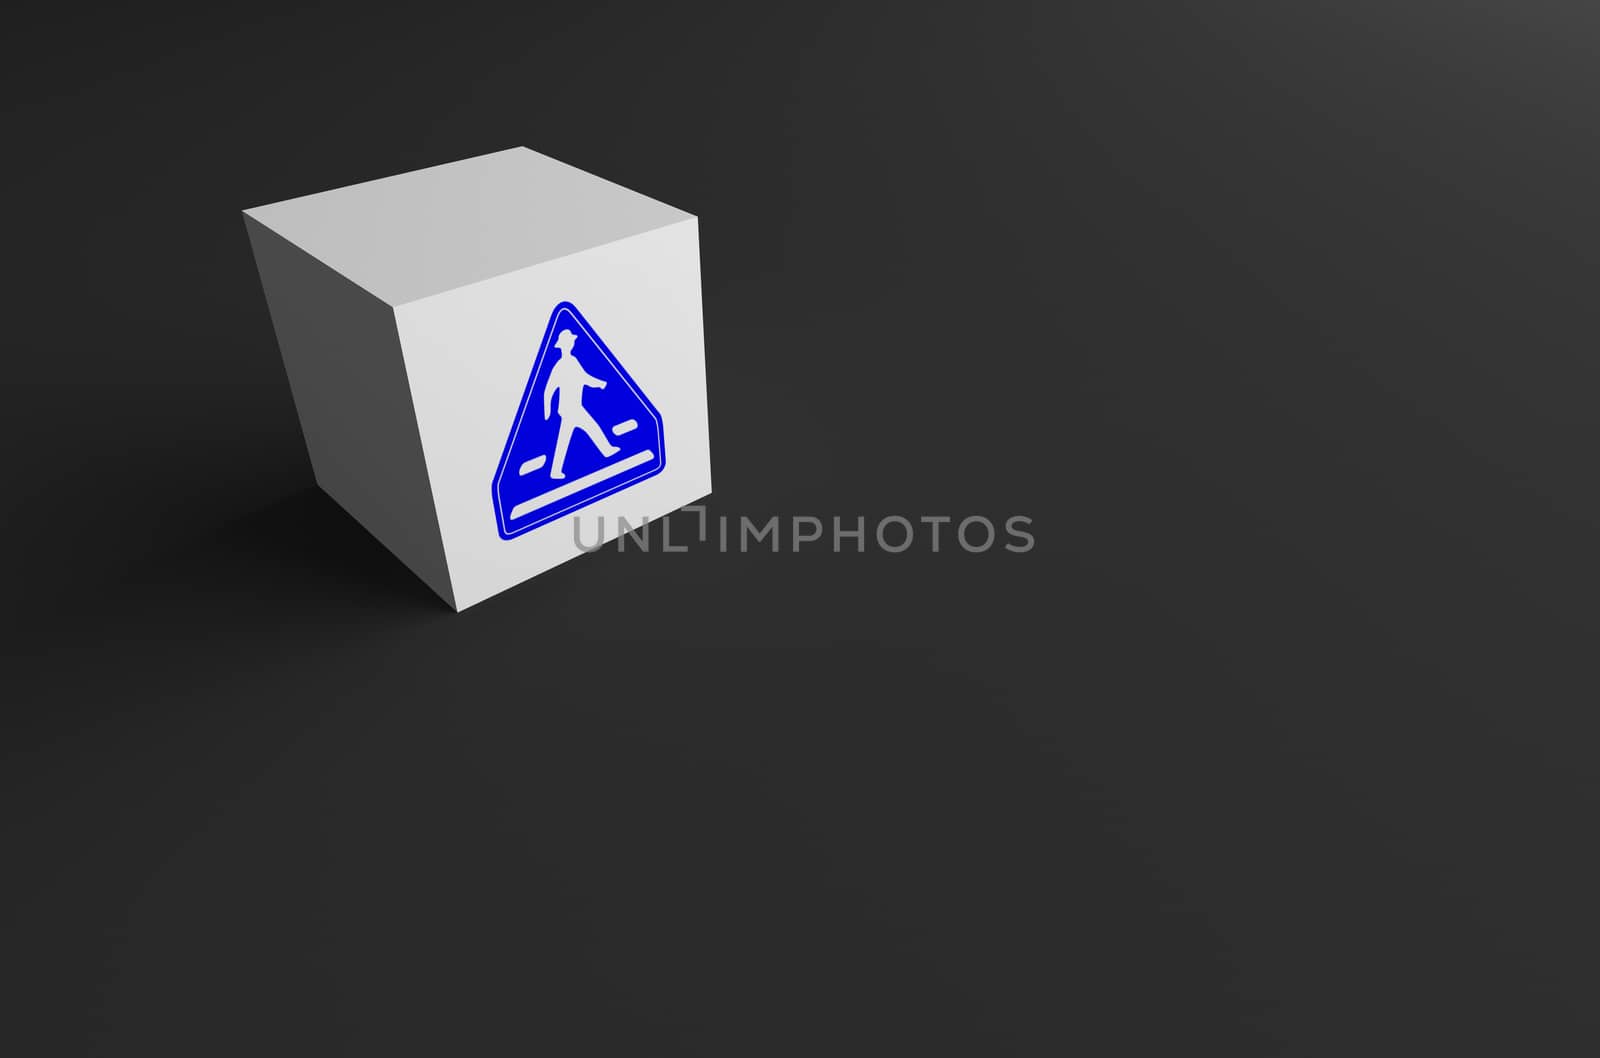 3D RENDERING OF ROAD SIGN ON WHITE CUBE WITH BLACK BACKGROUND